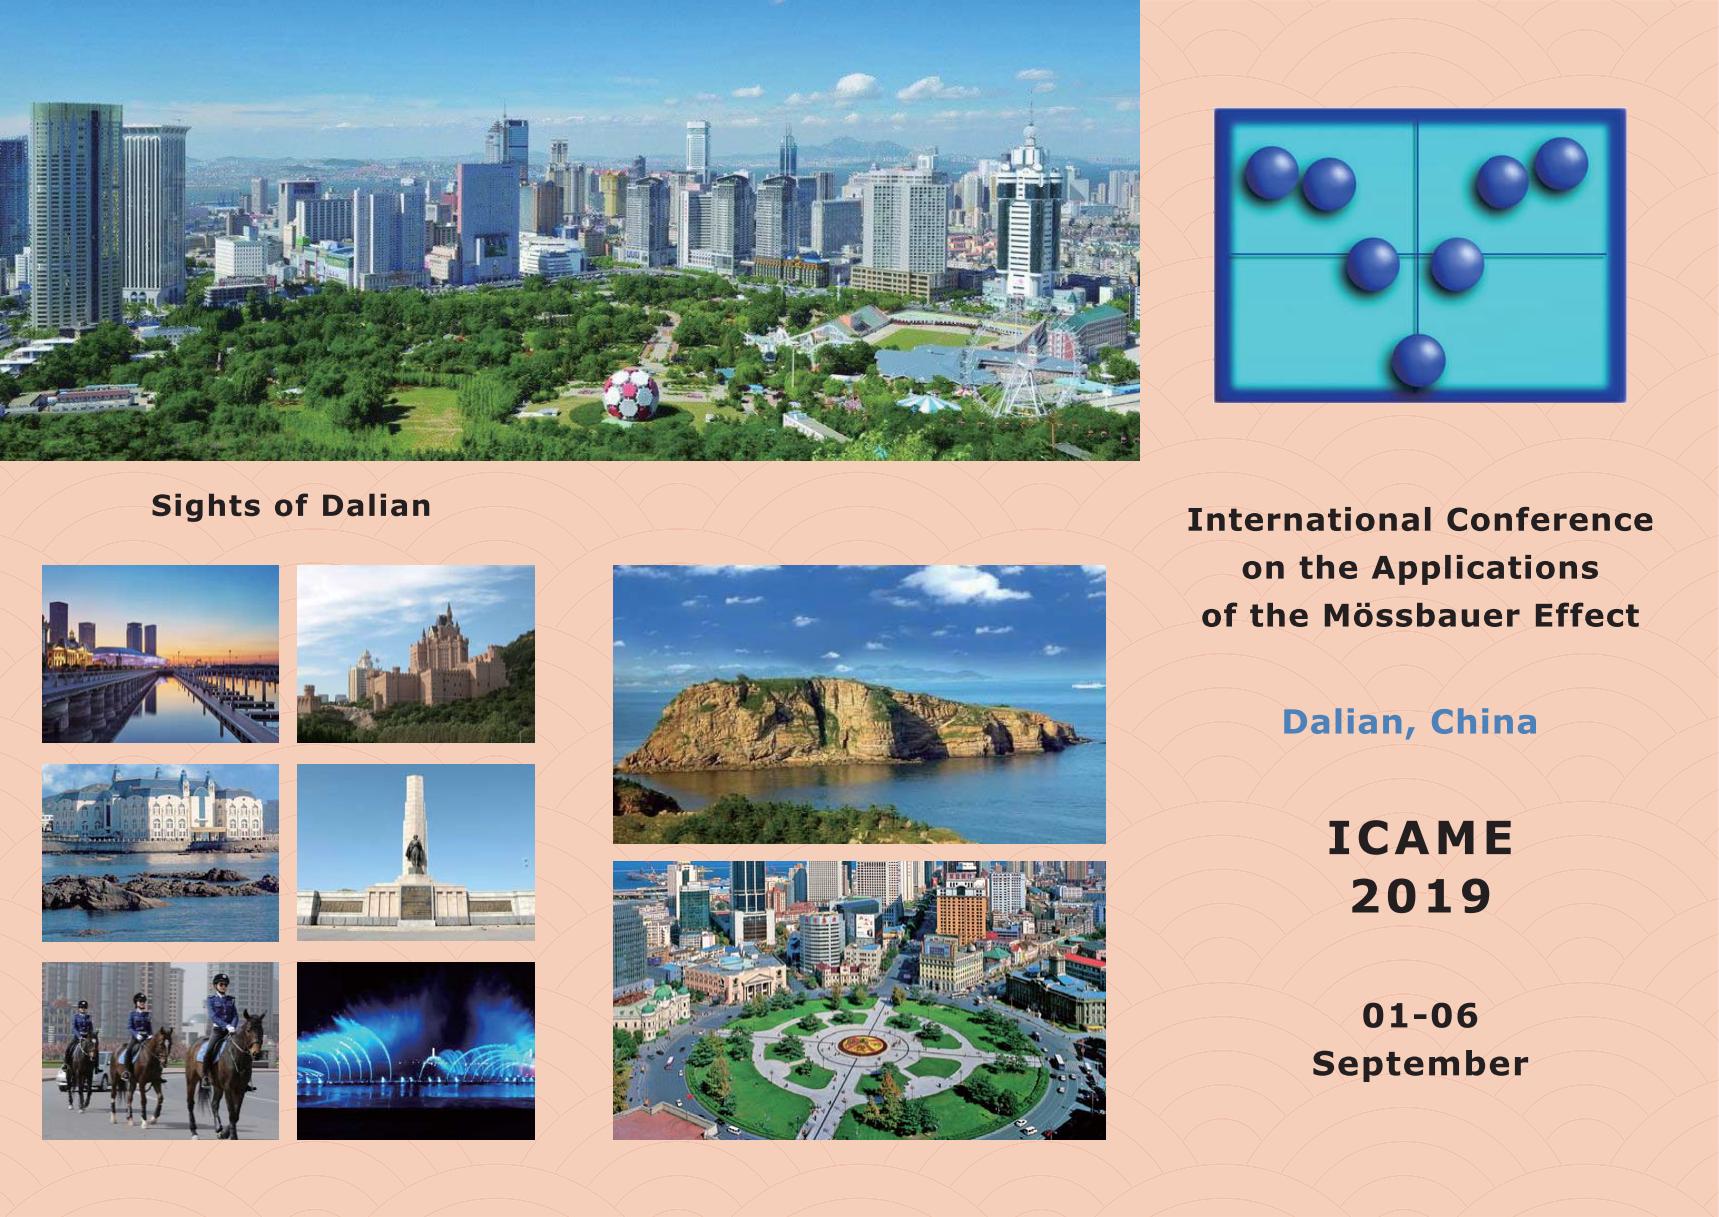 ICAME2019 Announcement